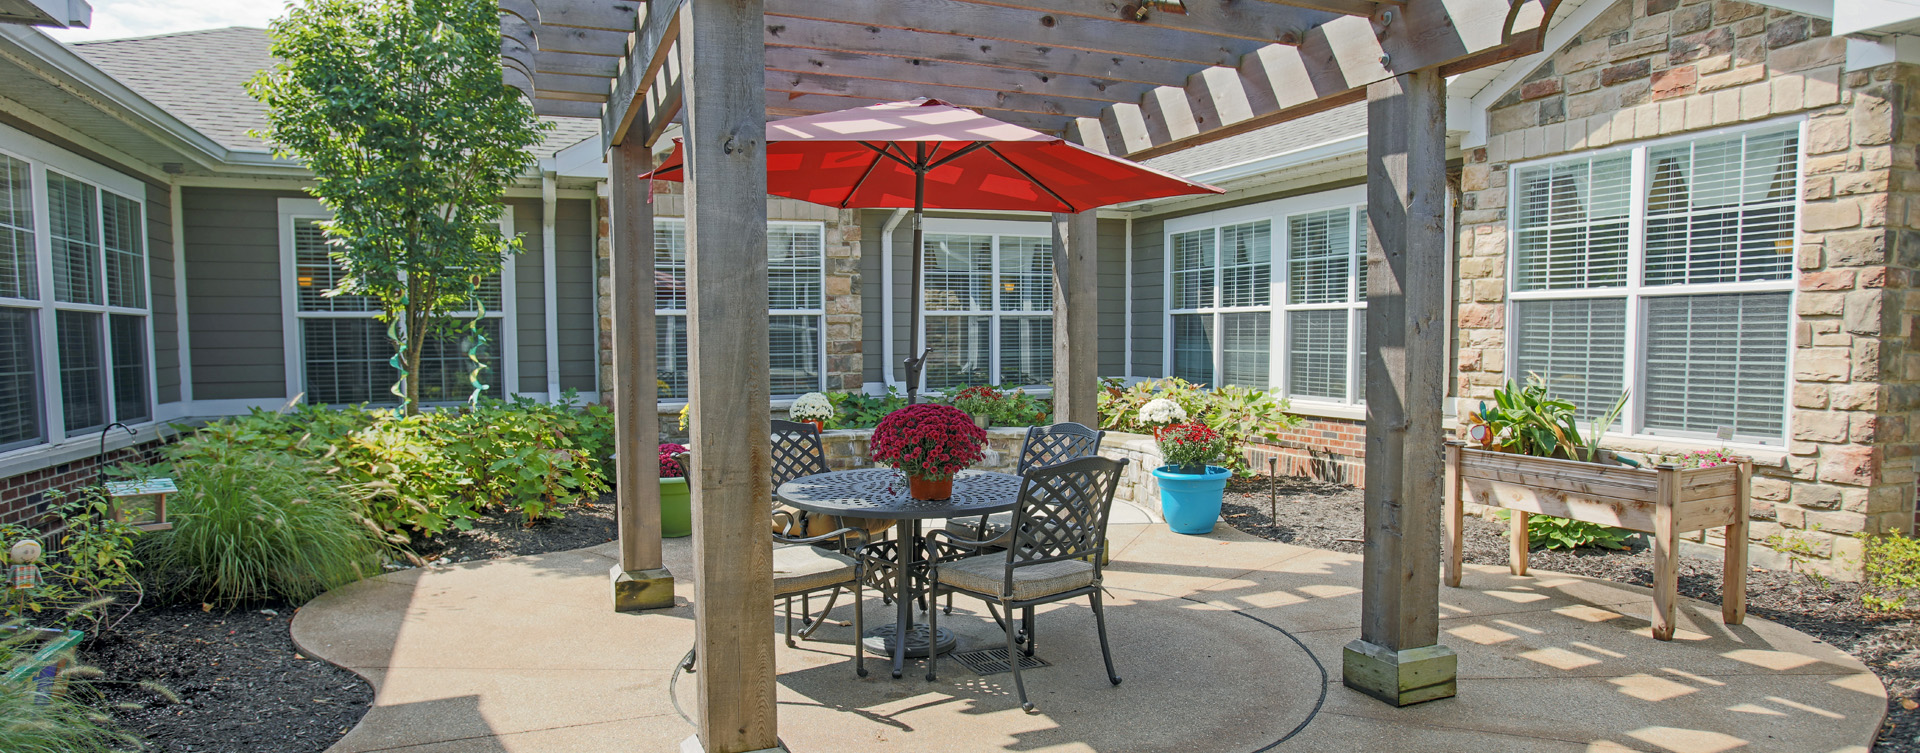 A single entrance courtyard gives residents with dementia the opportunity to be safe outside at Bickford of Carmel